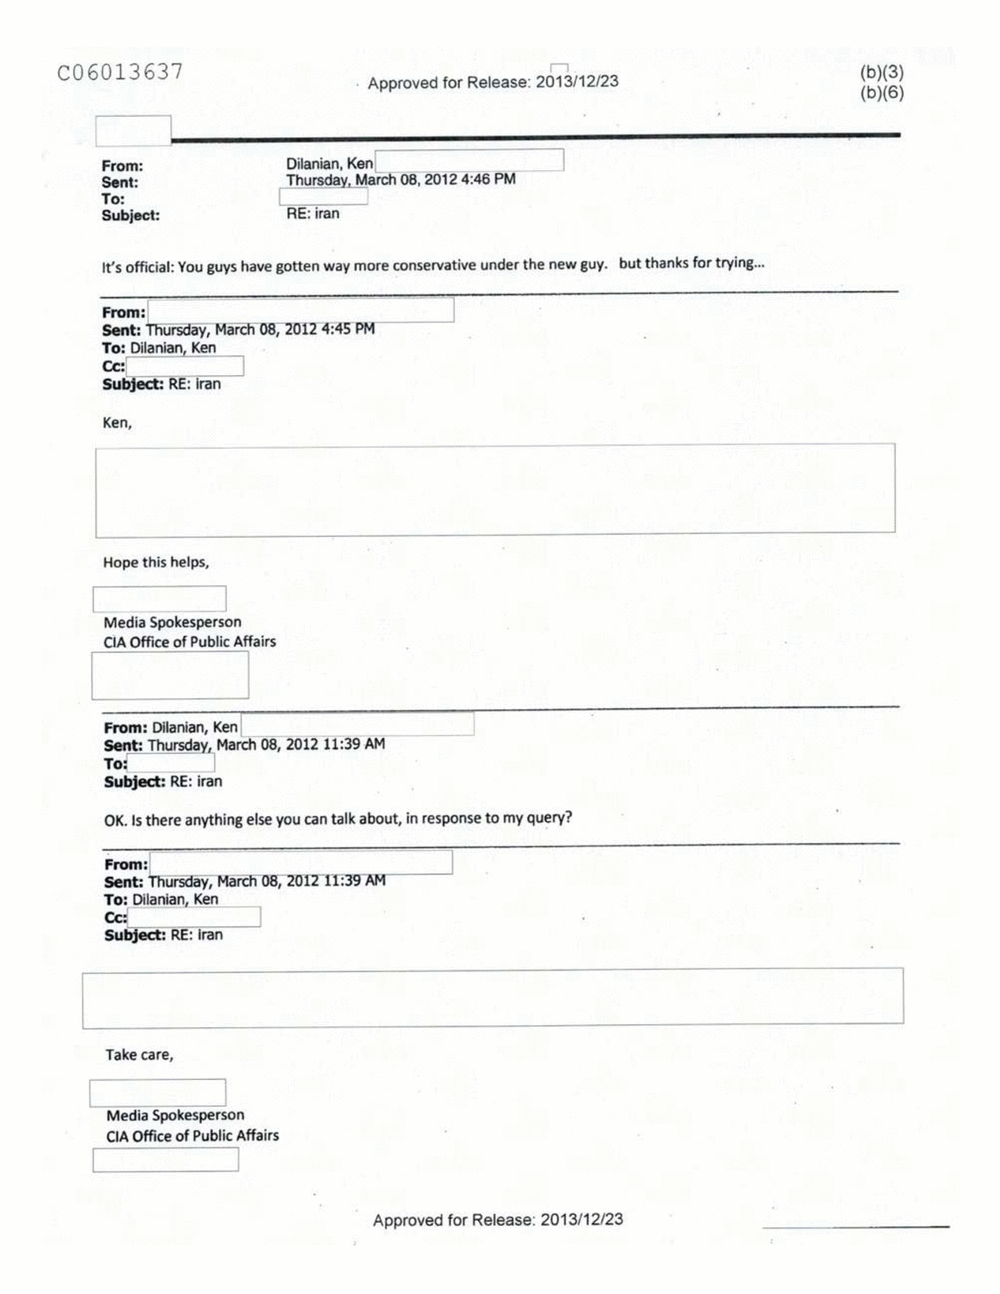 Page 476 from Email Correspondence Between Reporters and CIA Flacks